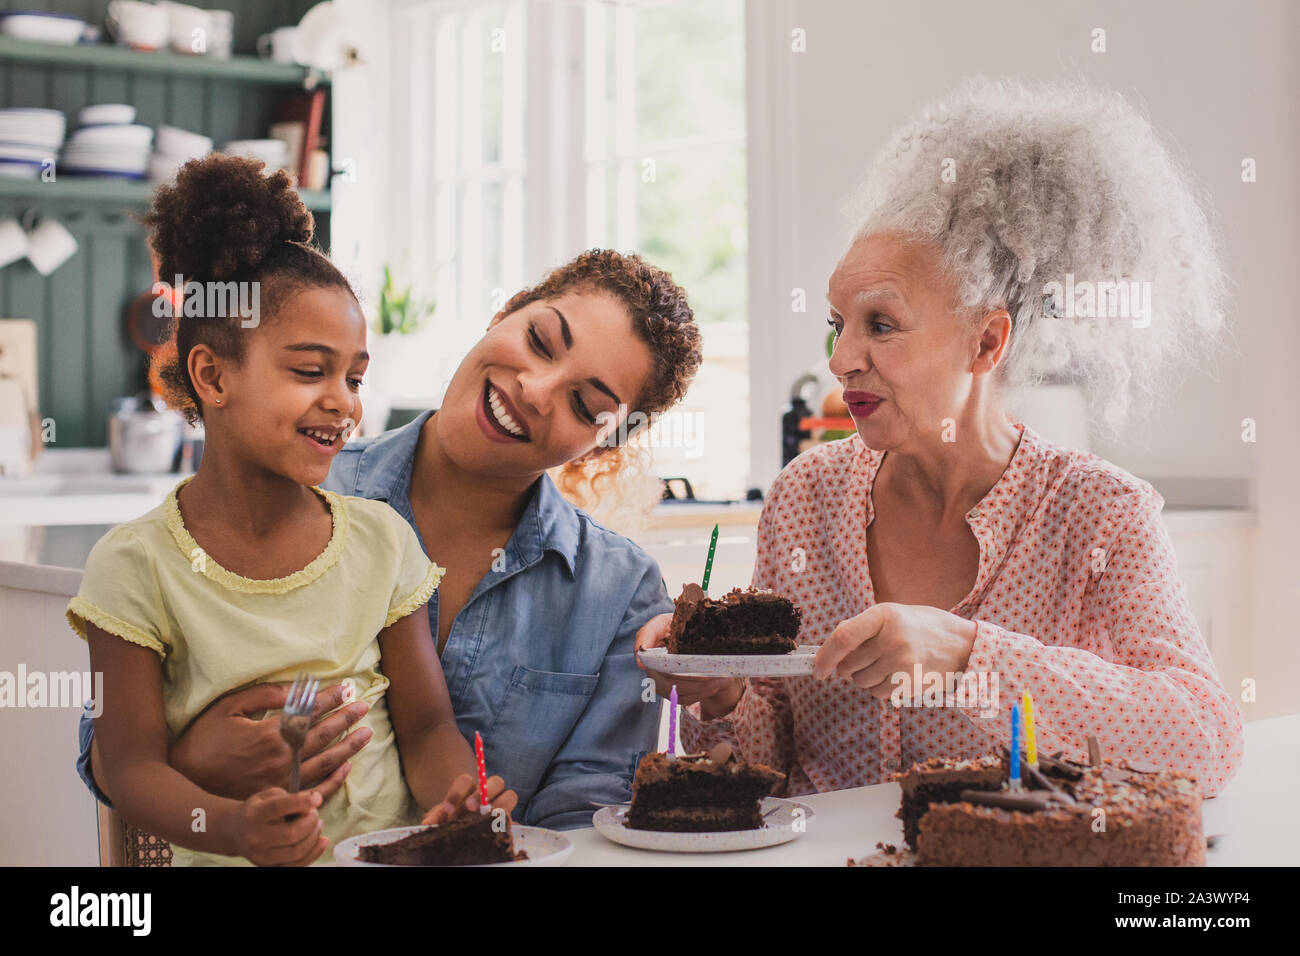 Three generations of family celebrating a birthday together Stock Photo